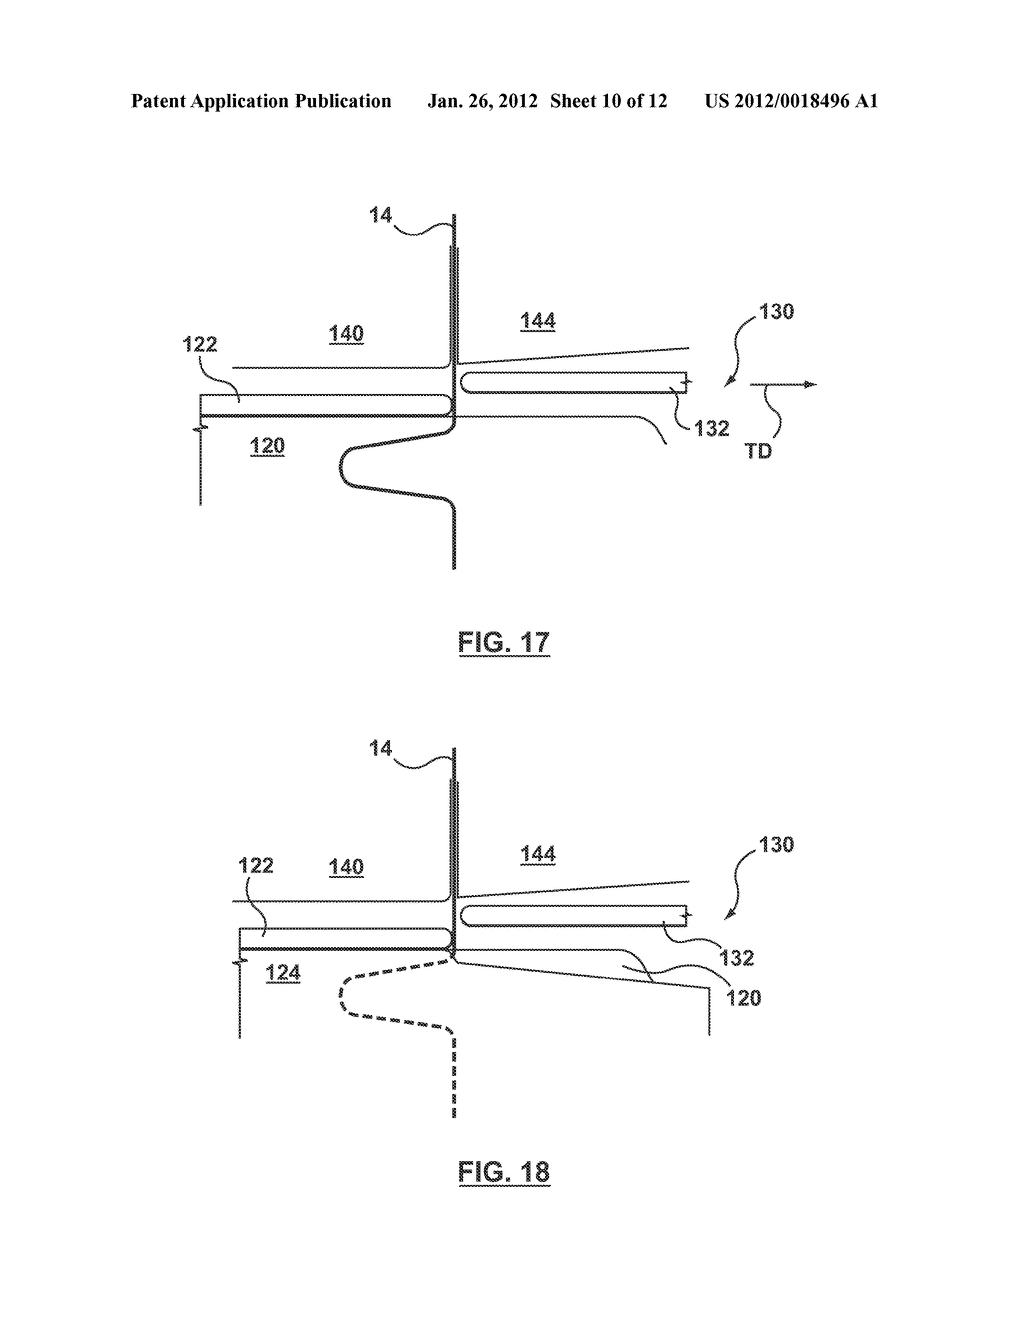 Method and Apparatus for Forming a Wave Form Used to Make Wound Stents - diagram, schematic, and image 11